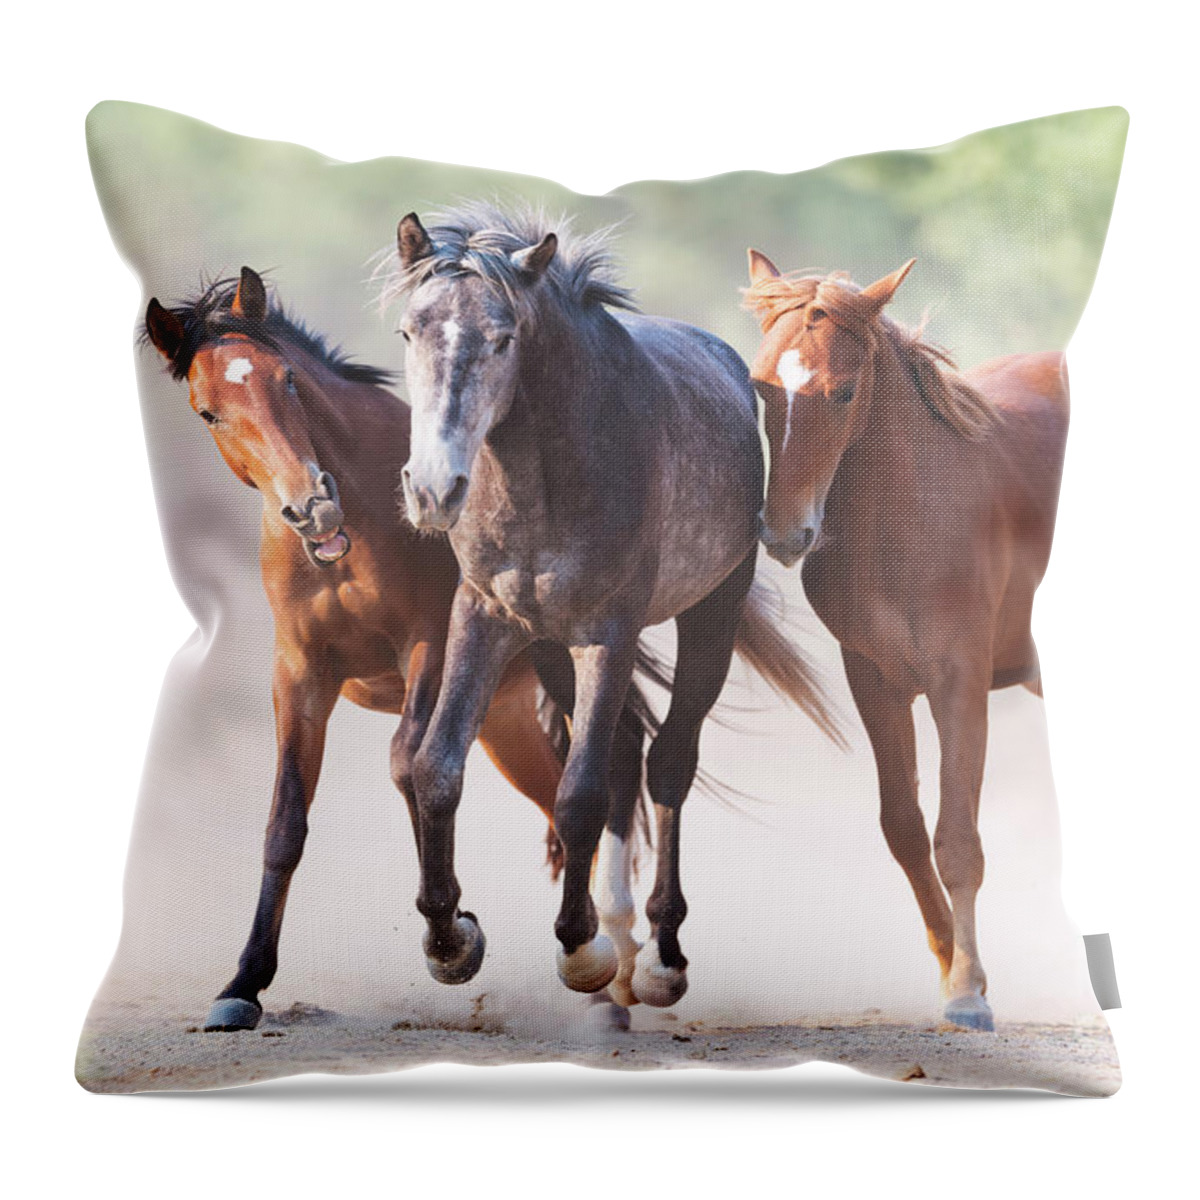 Battle Throw Pillow featuring the photograph Play by Shannon Hastings